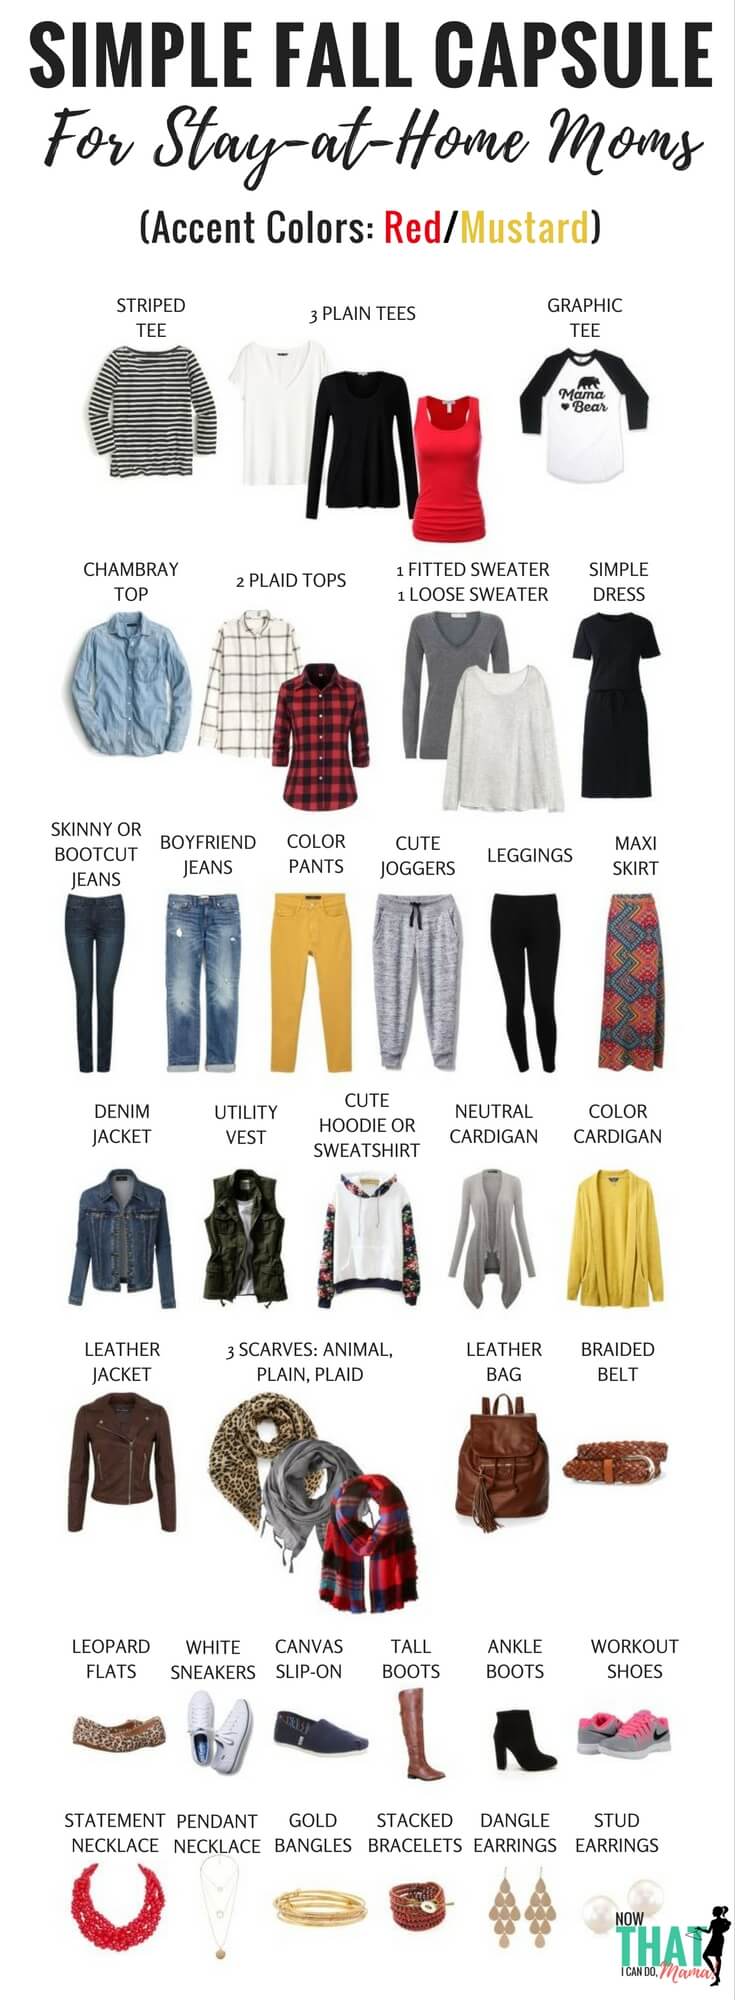 Are you a stay-at-home mom needing ideas for a flexibly stylish but comfortable fall wardrobe? Check out this simple ensemble that creates 72+ outfits to keep you looking fabulous all fall! Click through for graphics and printables.